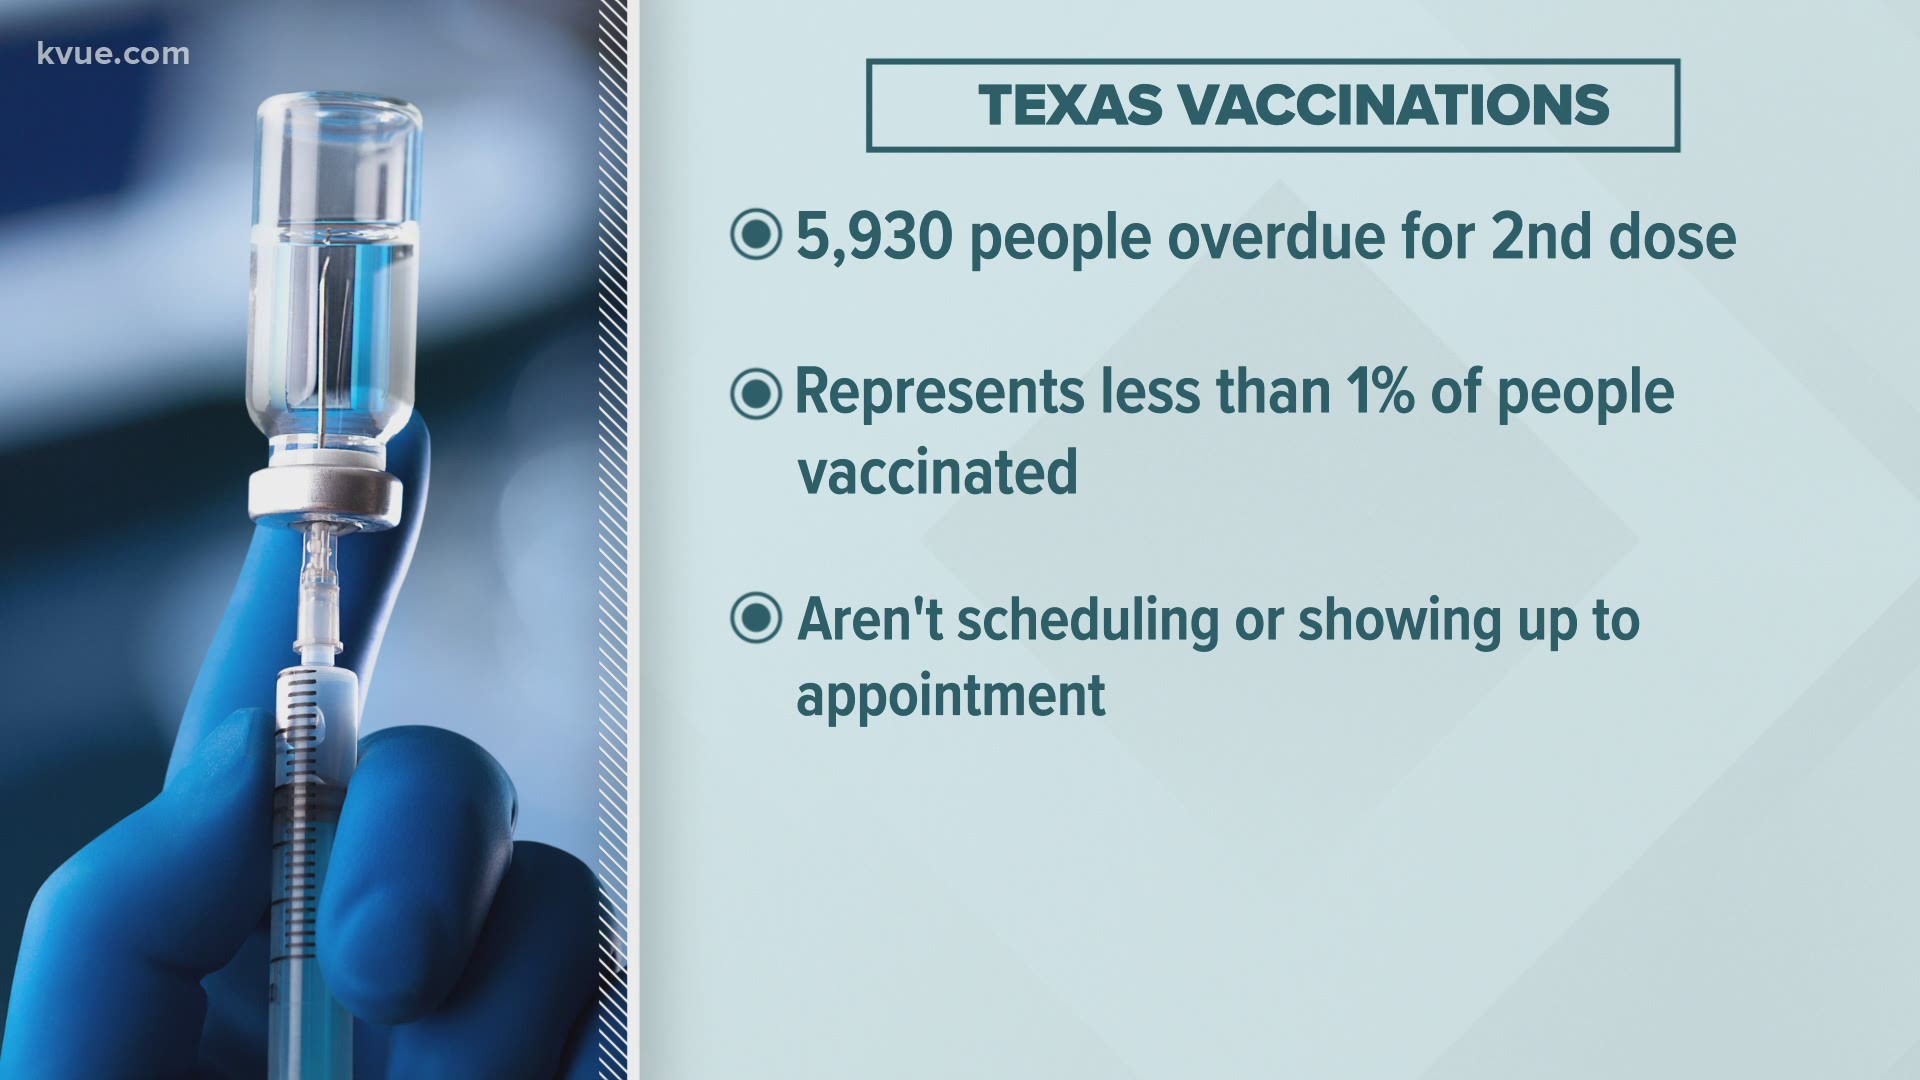 Almost 6,000 Texans are overdue for their second vaccine dose.